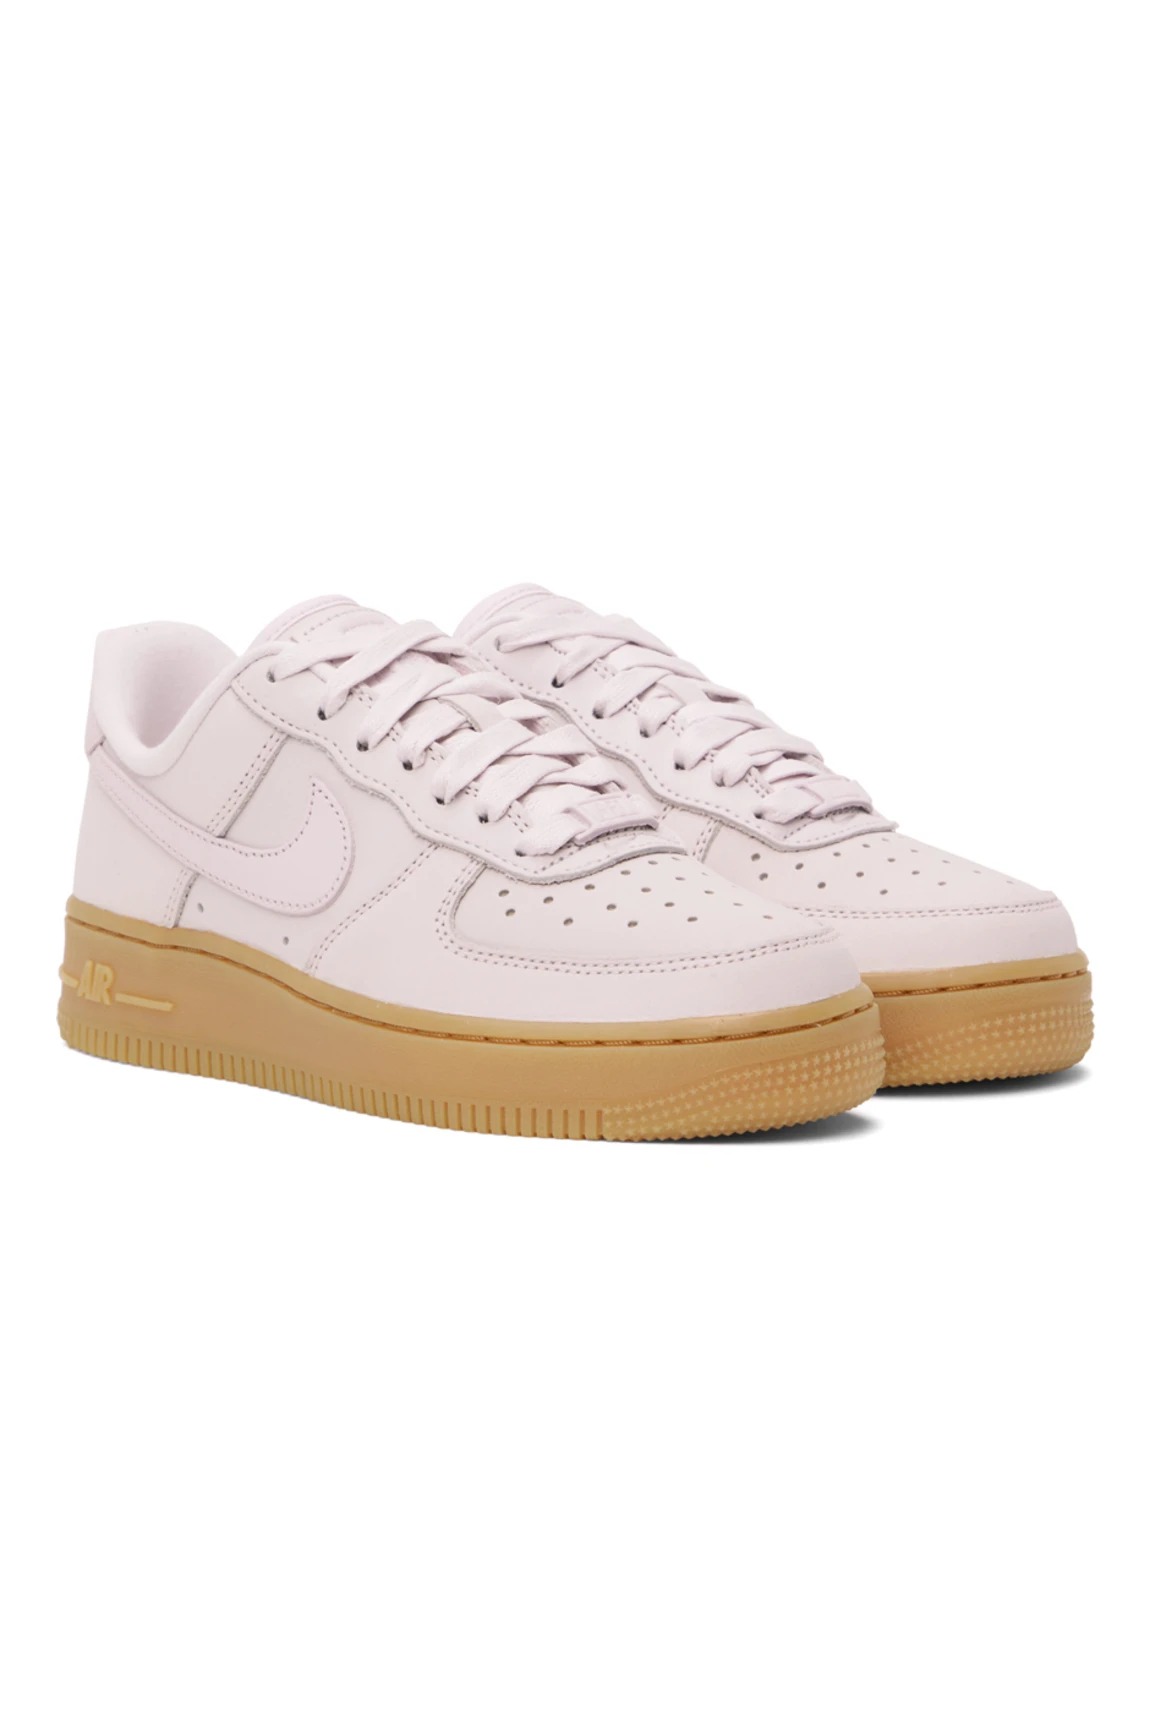 Pink Perfection: The New Nike Air Force 1’s with Gum Sole on SSENSE